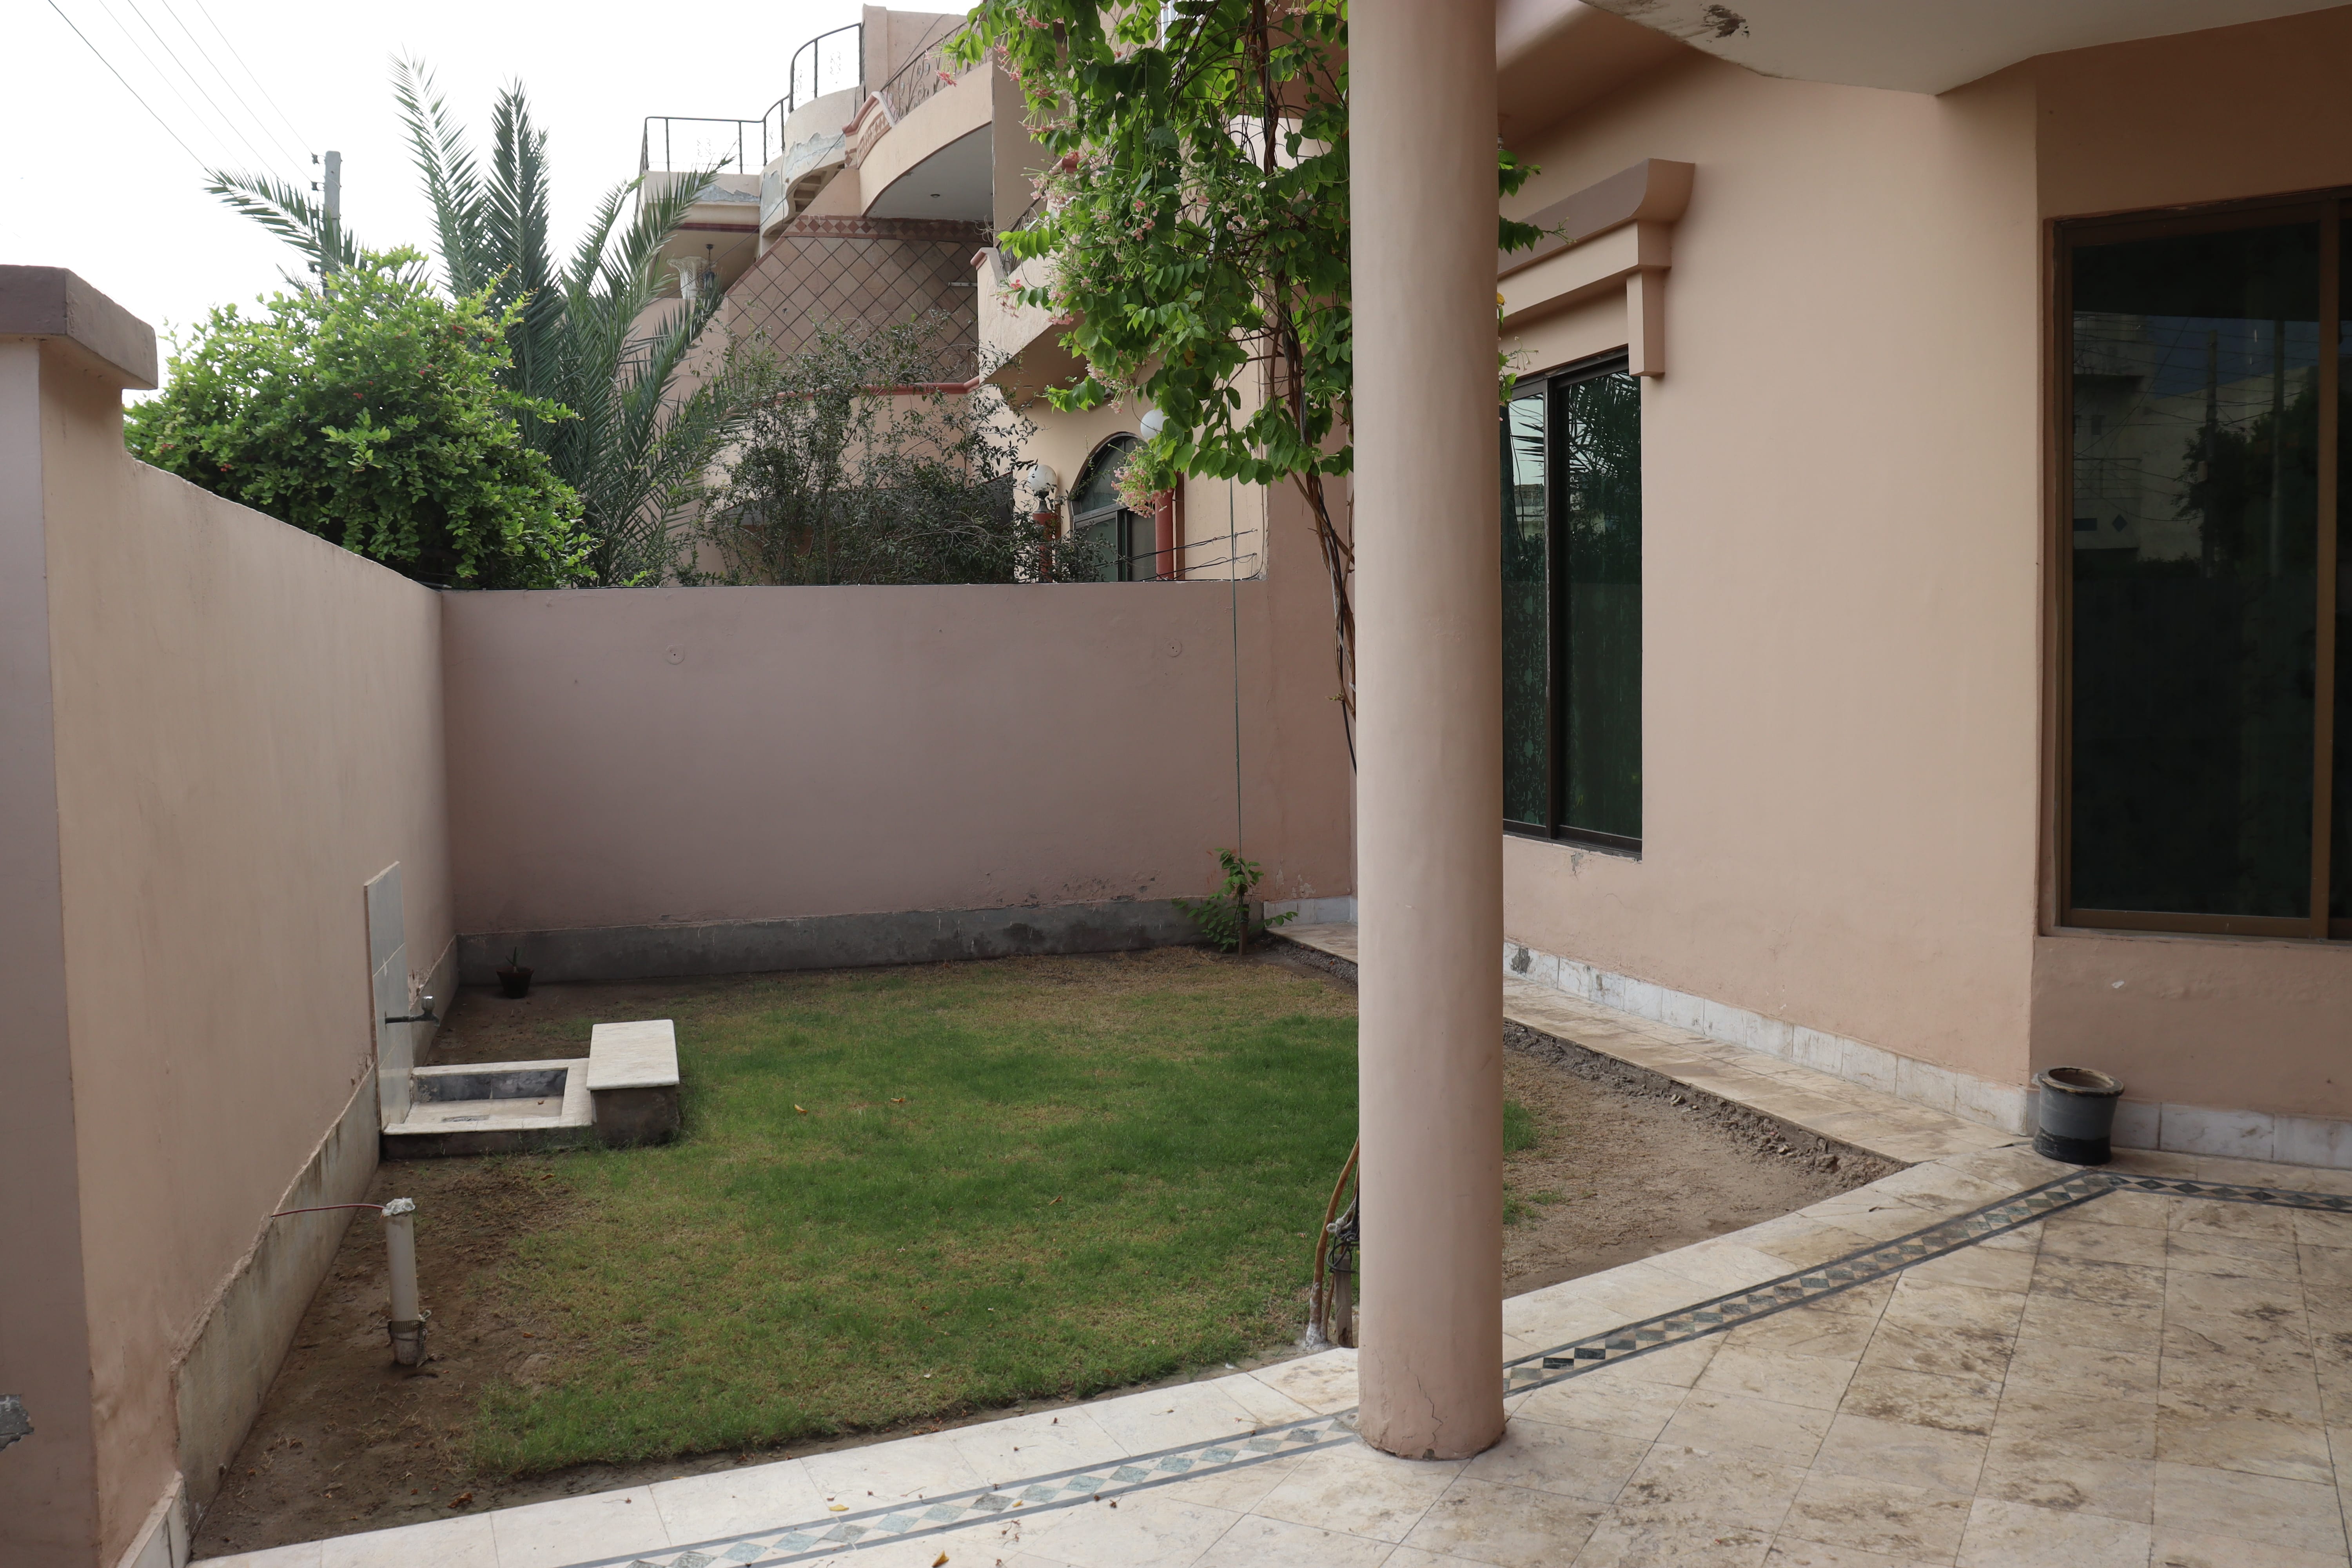 10 Marla House located in gated community - Maryam Villas, Amin town, Canal road is up for sale.